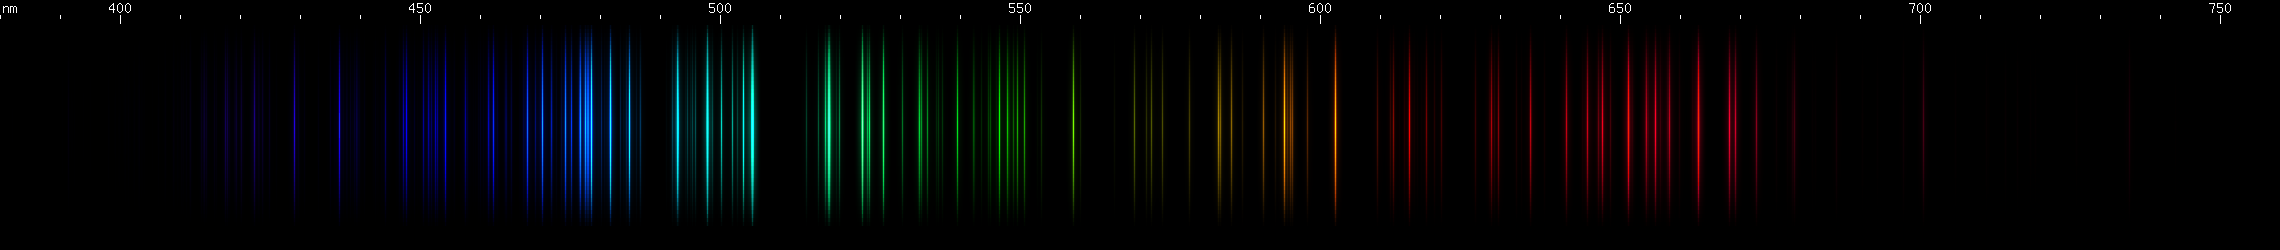 Spectral Lines of Bromine